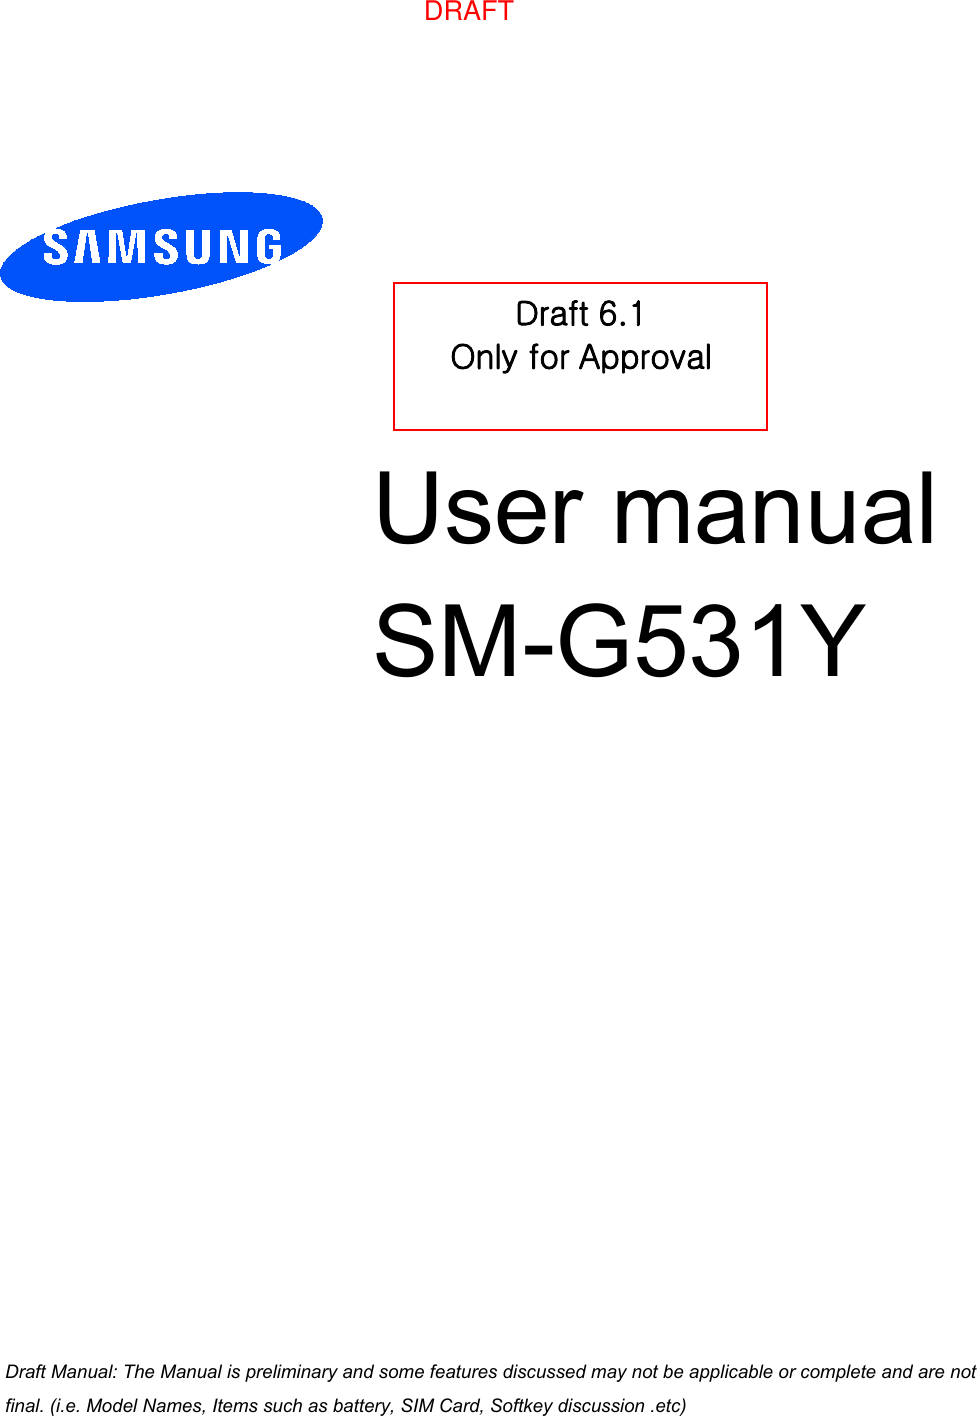 User manual  SM-G531YDraft 6.1 Only for Approval Draft Manual: The Manual is preliminary and some features discussed may not be applicable or complete and are not final. (i.e. Model Names, Items such as battery, SIM Card, Softkey discussion .etc)DRAFT